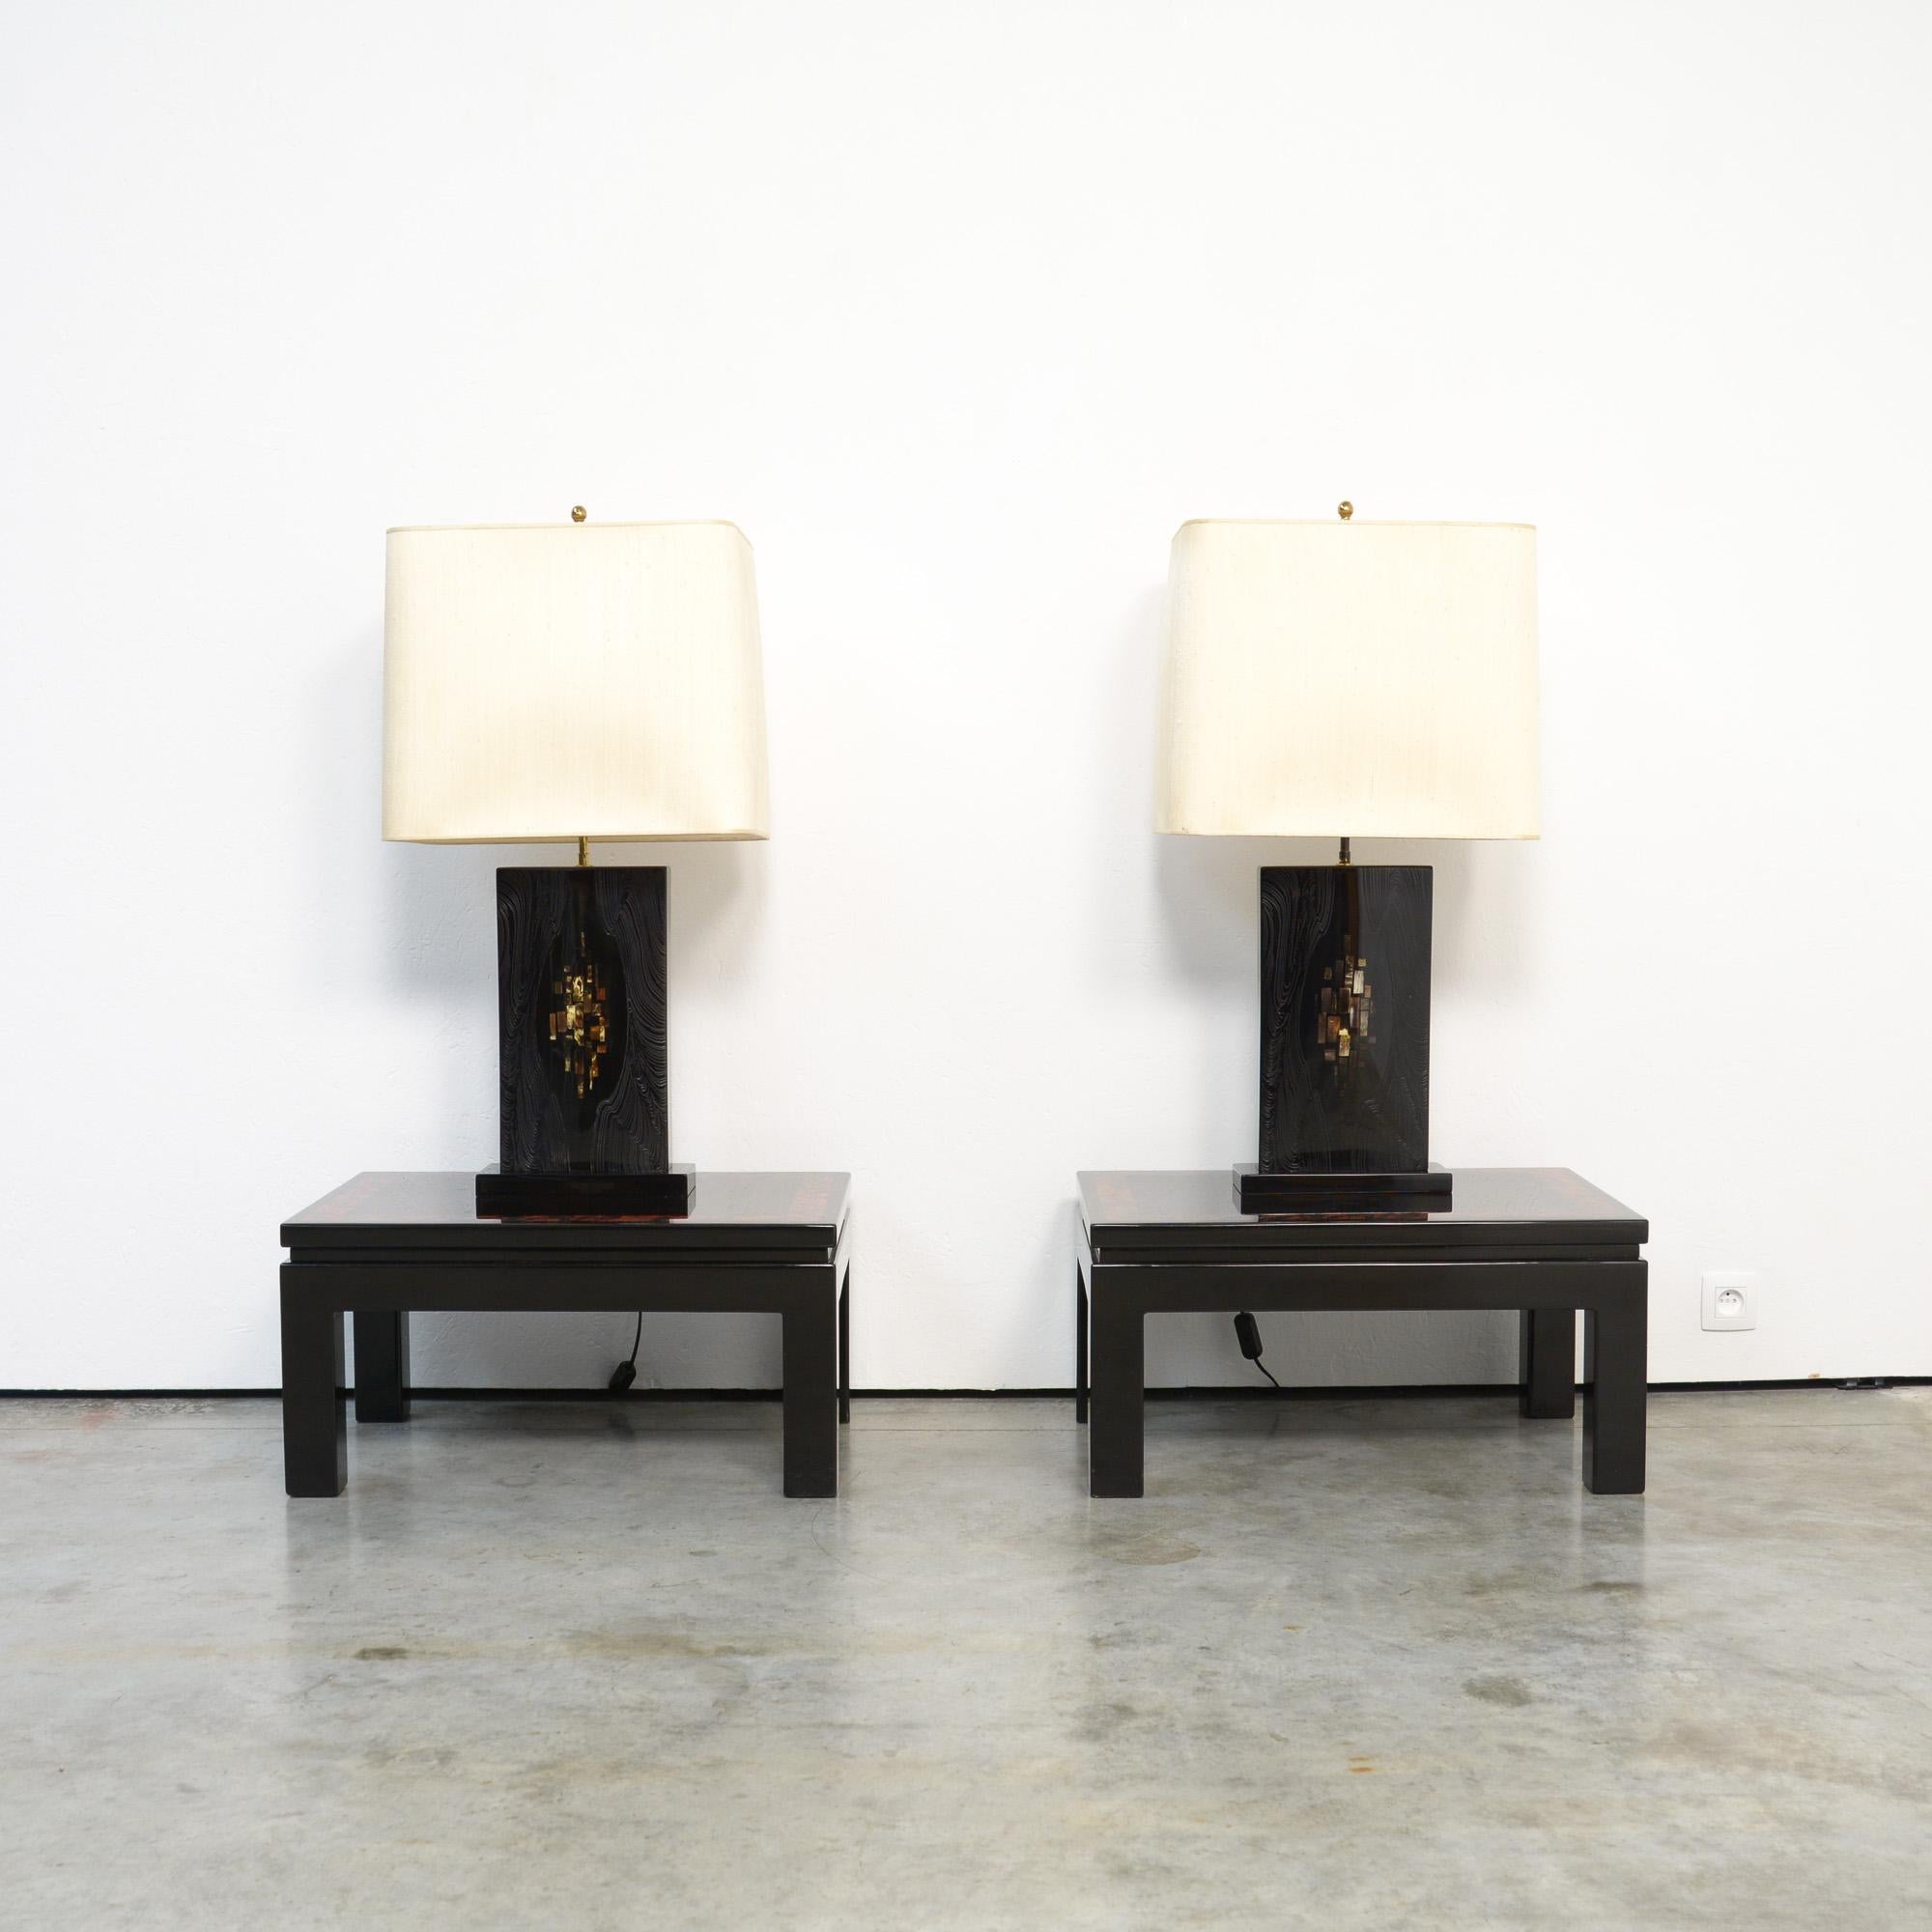 This exclusive pair of table lamps was designed and created in the Atelier of Marcel and Jean-Claude Dresse. The lamps can be dated in the 1970s.
The base is made of glossy black lacquered resin with bone inlay. The artist created a geometric